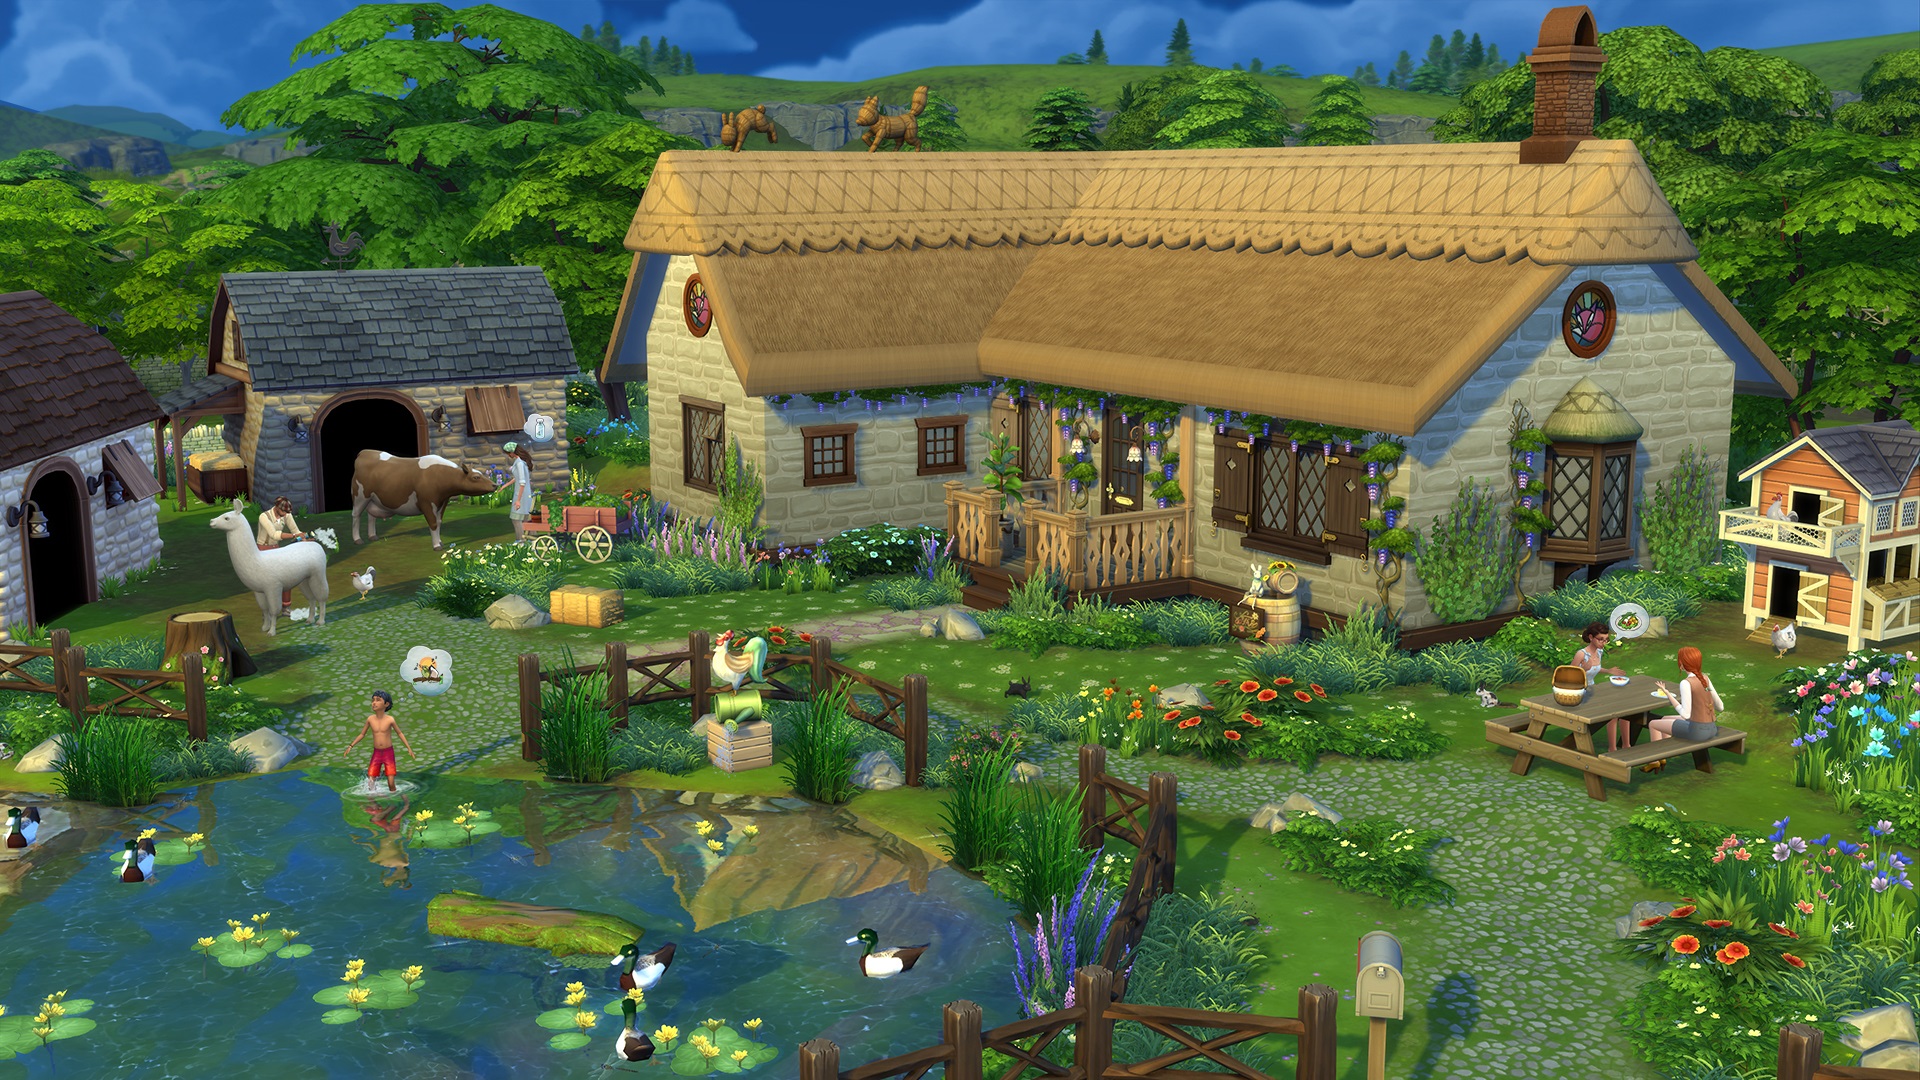 Get back to nature with The Sims 4 Cottage Living expansion